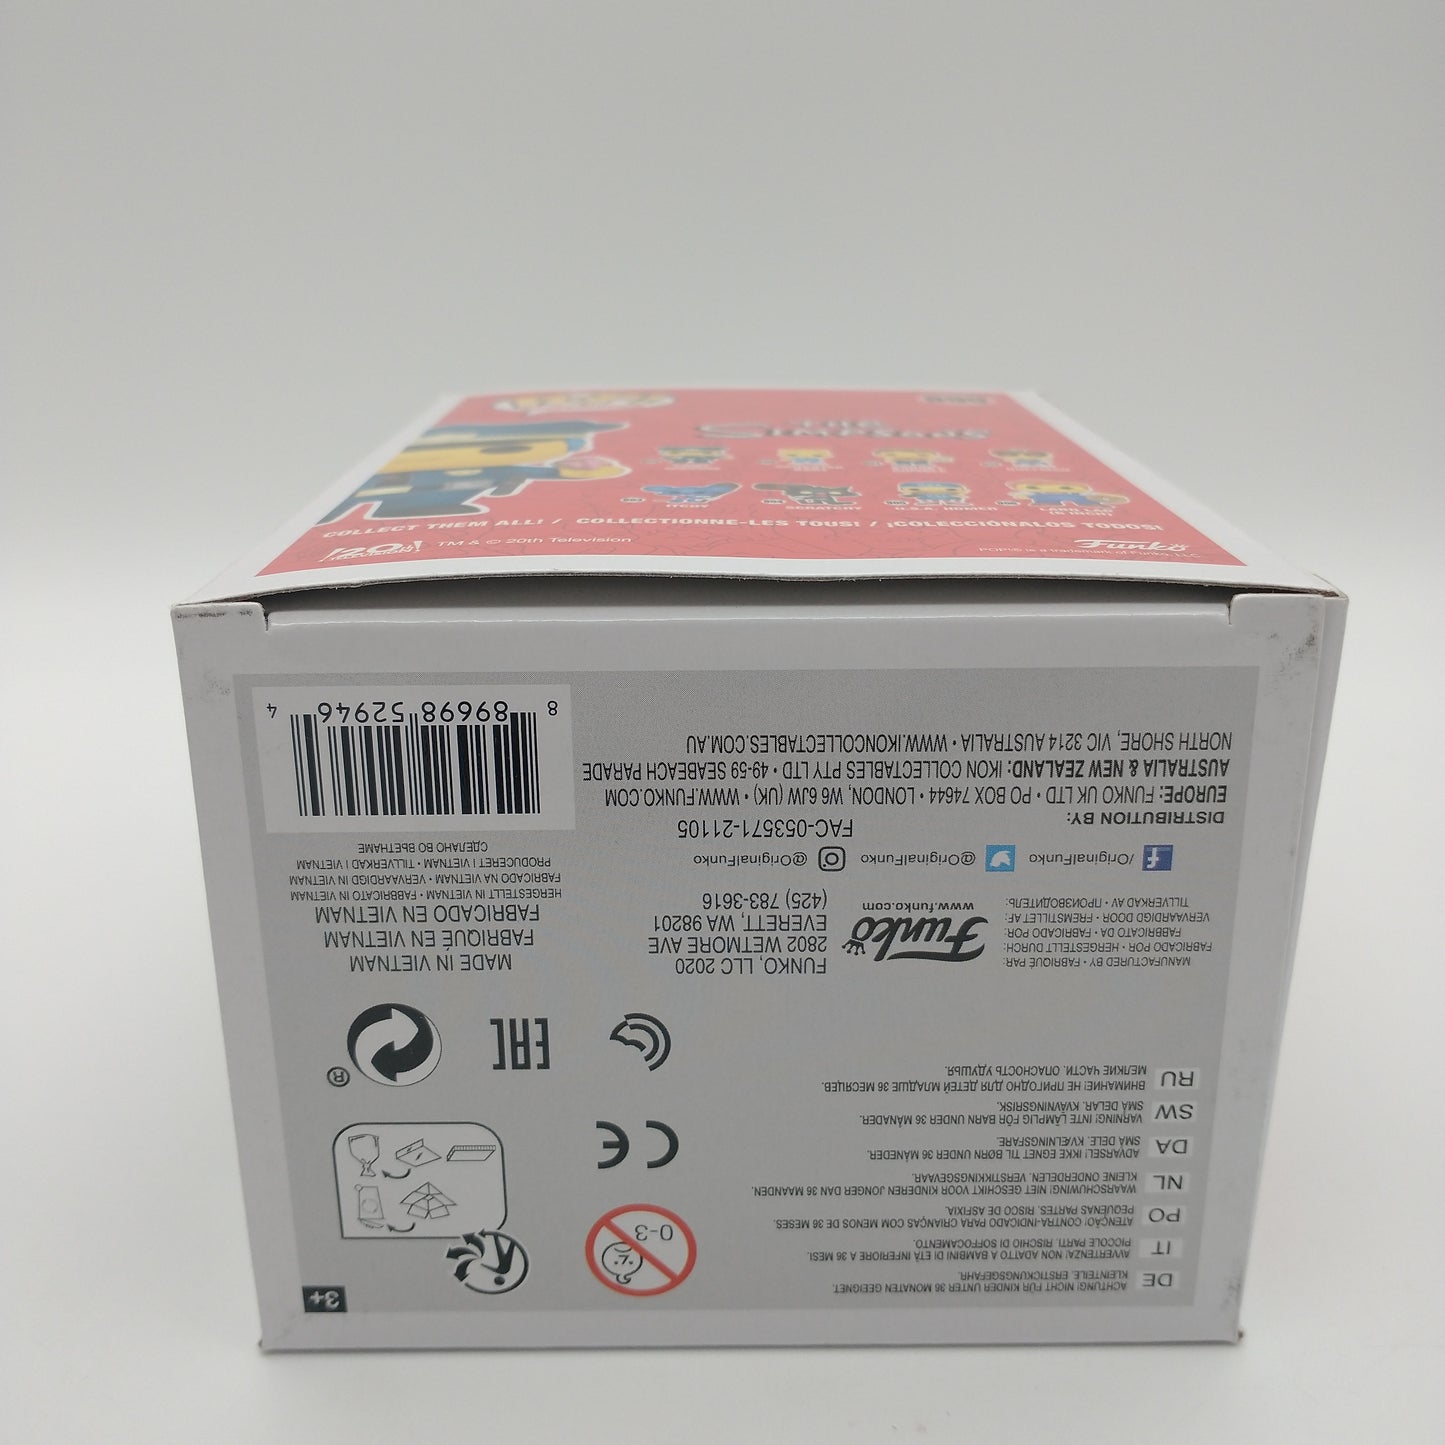 The bottom of the box with a barcode